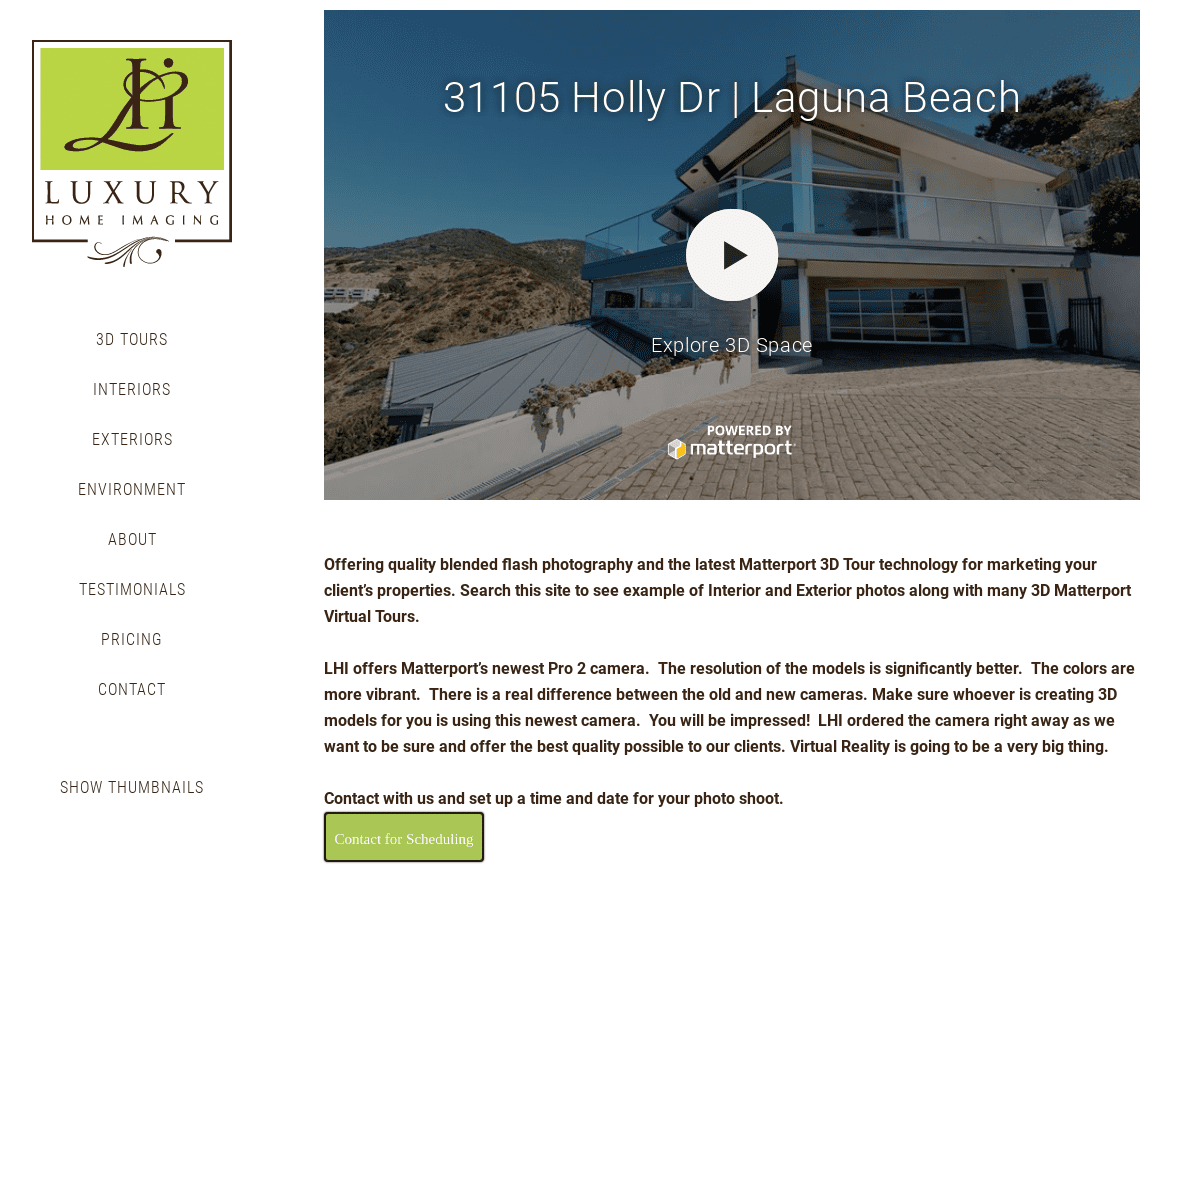 A complete backup of luxuryhomeimaging.com